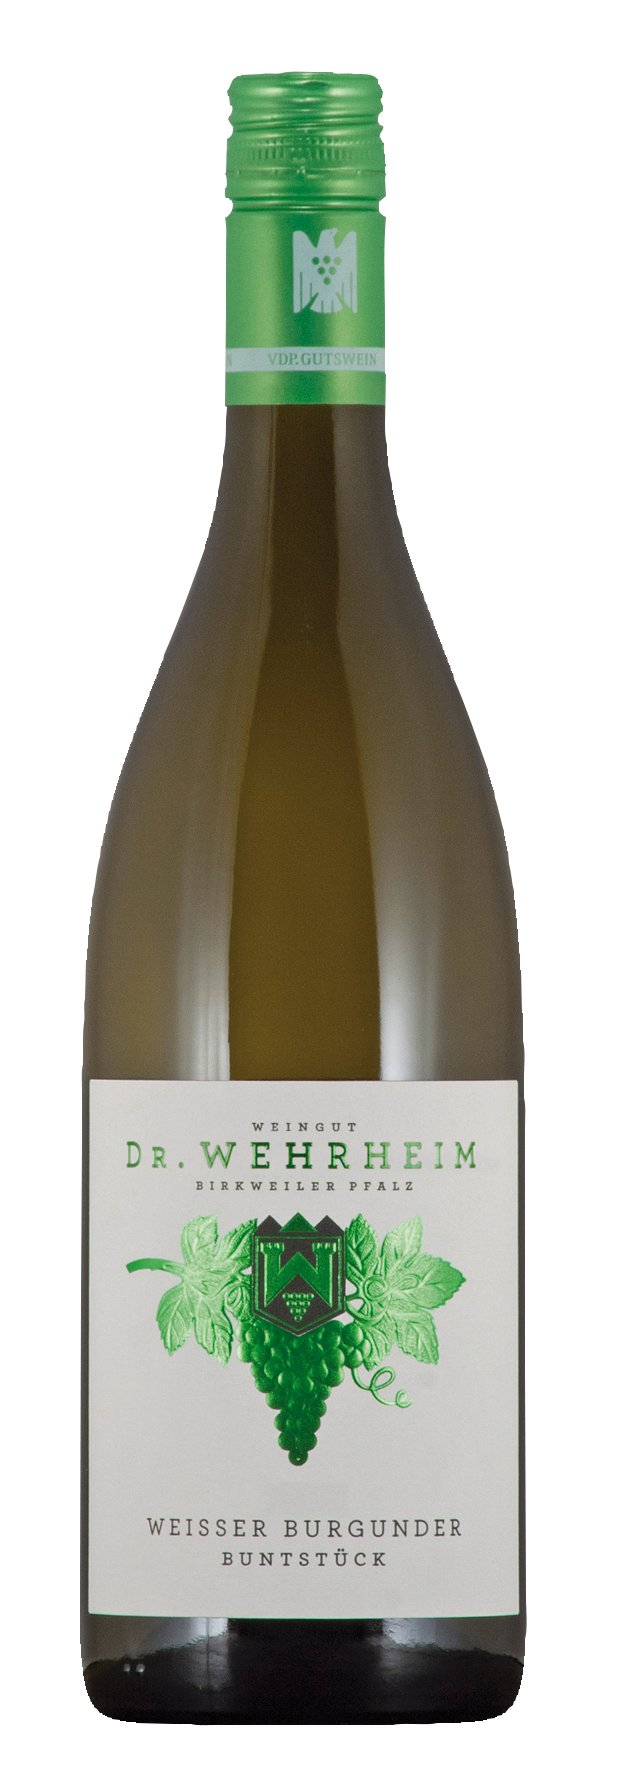 wein.plus members | The our find+buy wein.plus find+buy: of wines